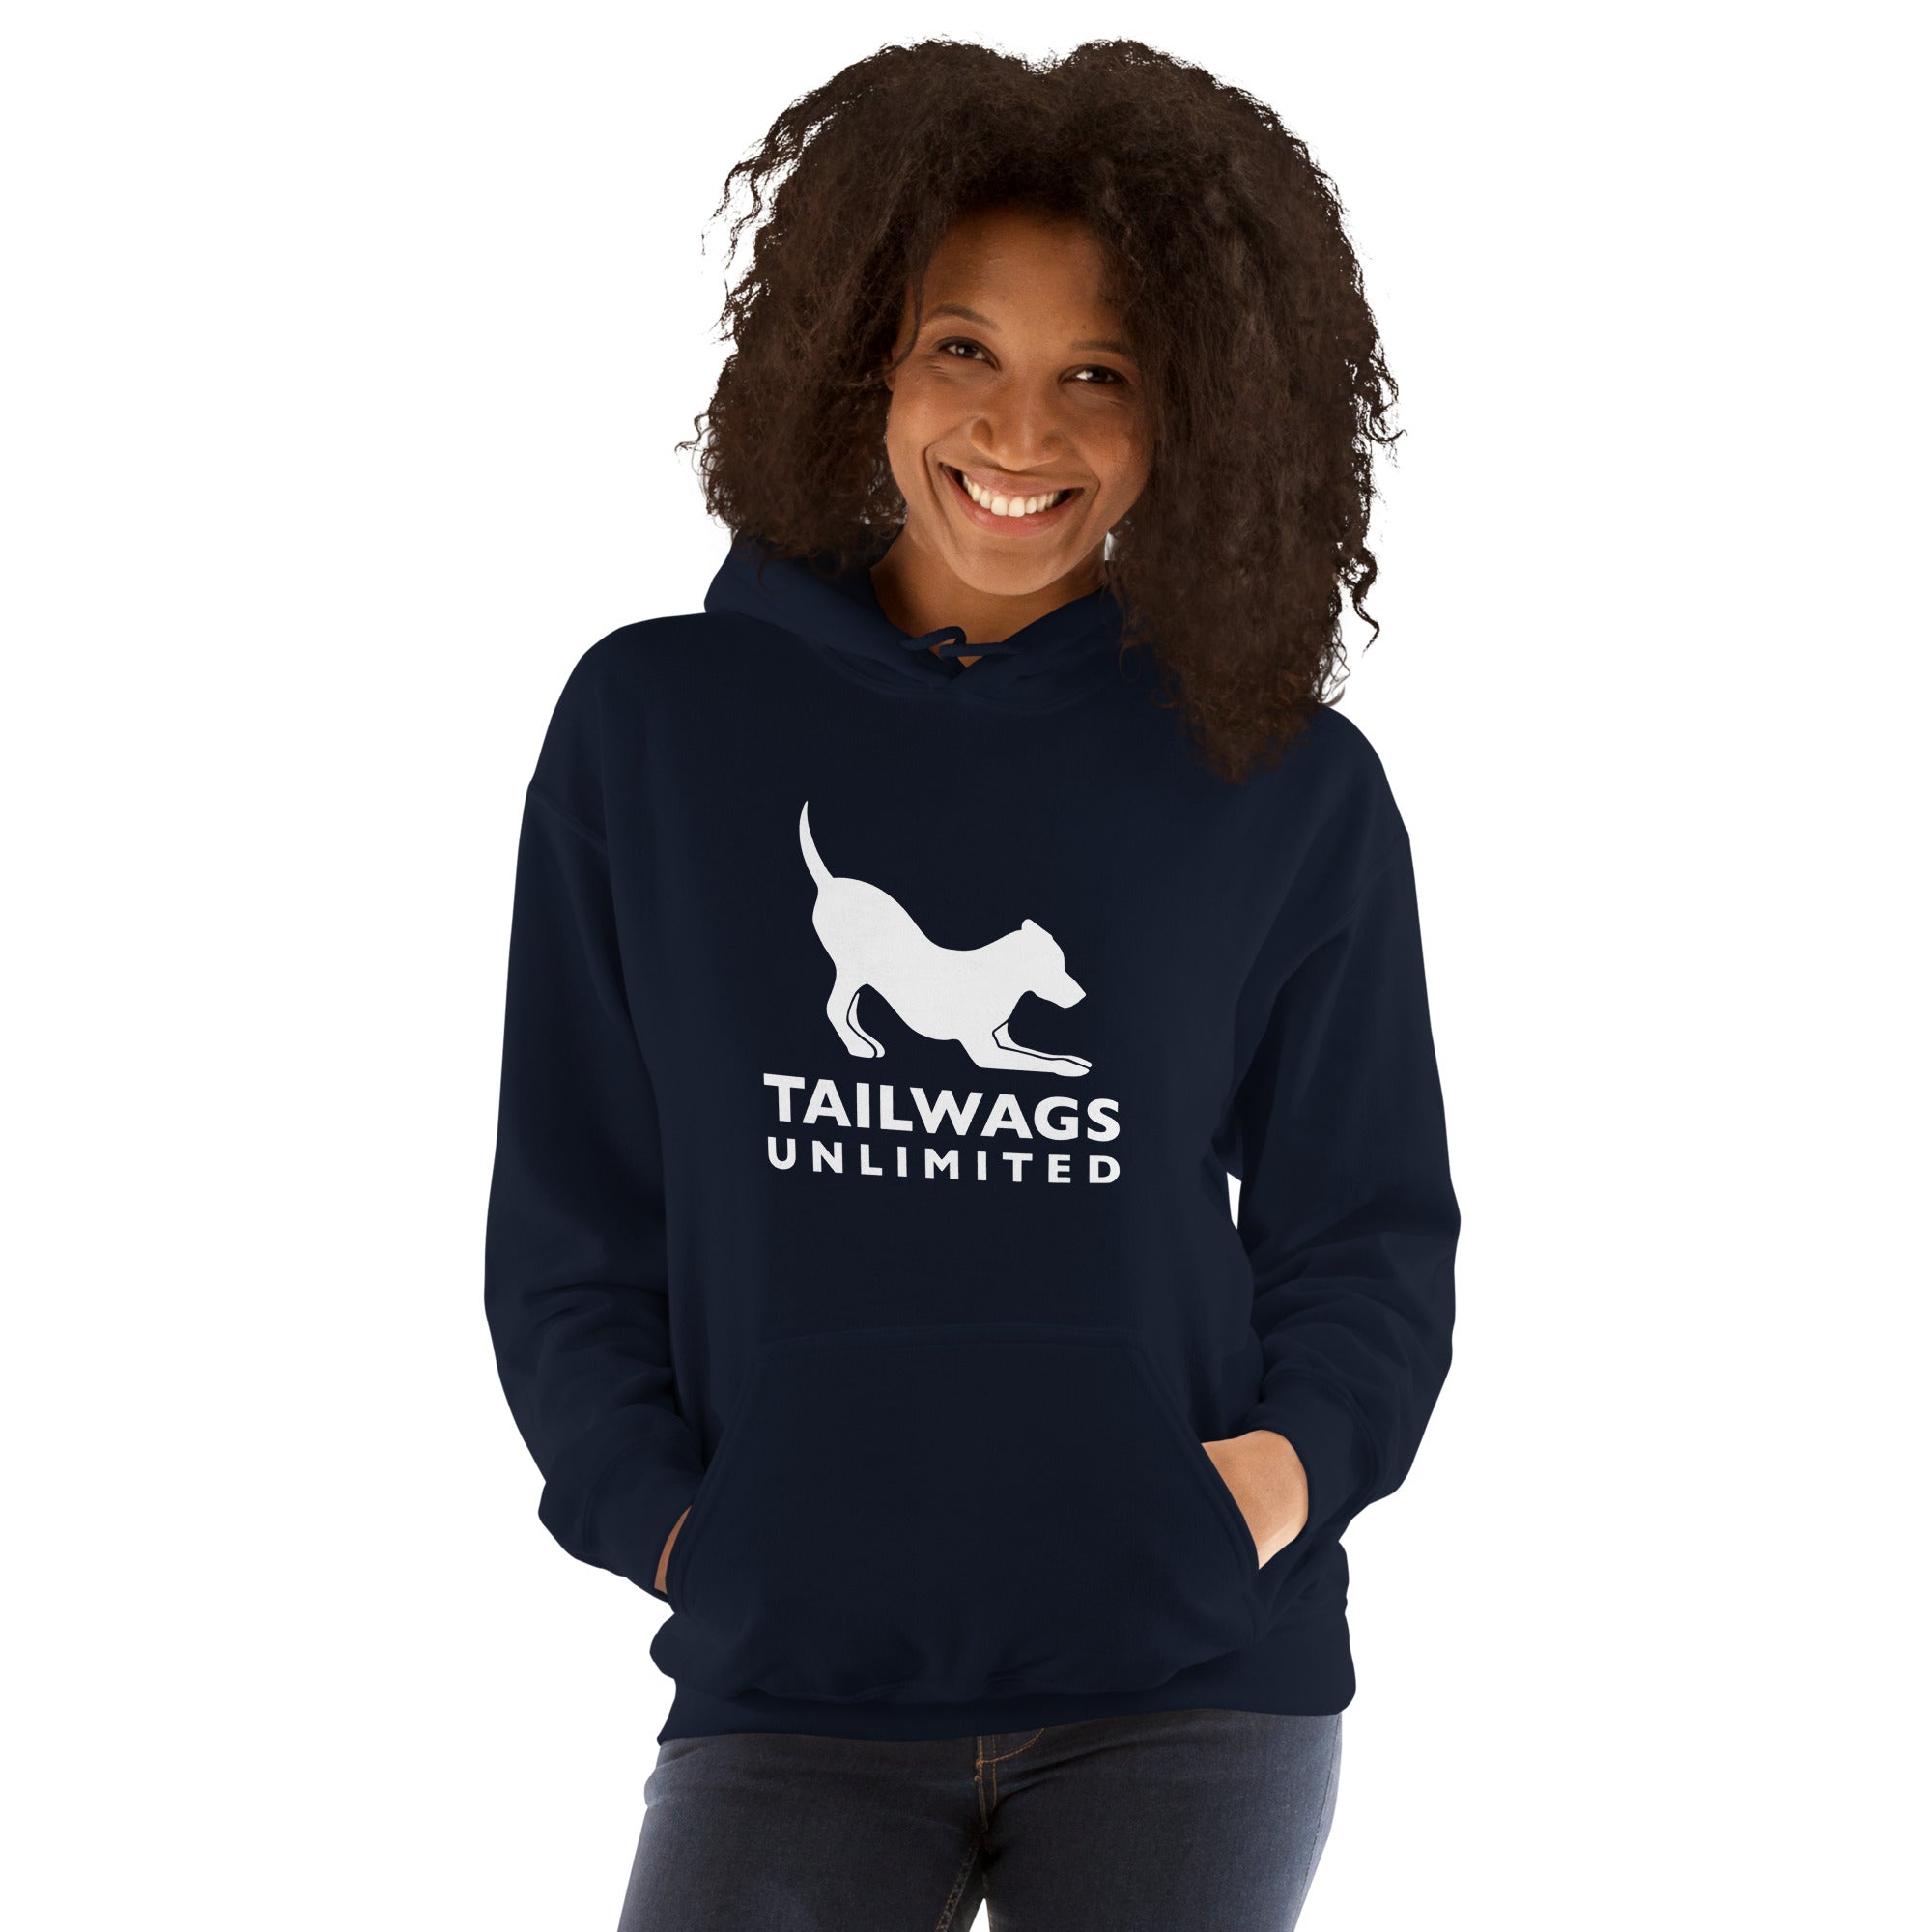 White Logo Hoodie - TAILWAGS UNLIMITED